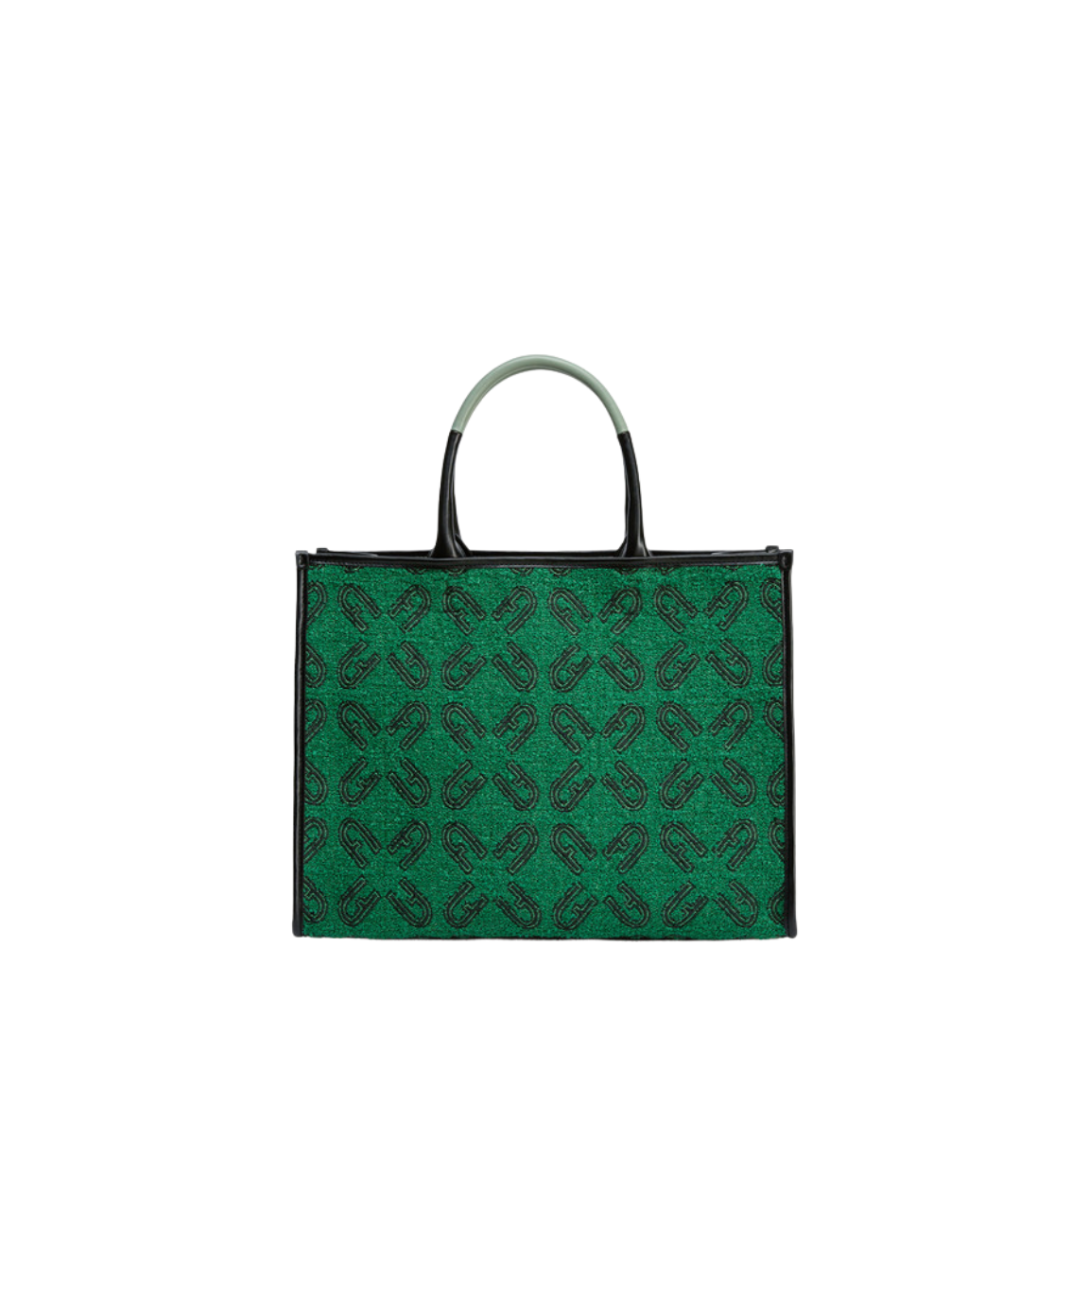 Image of a green and black printed tote bag from FURLA.